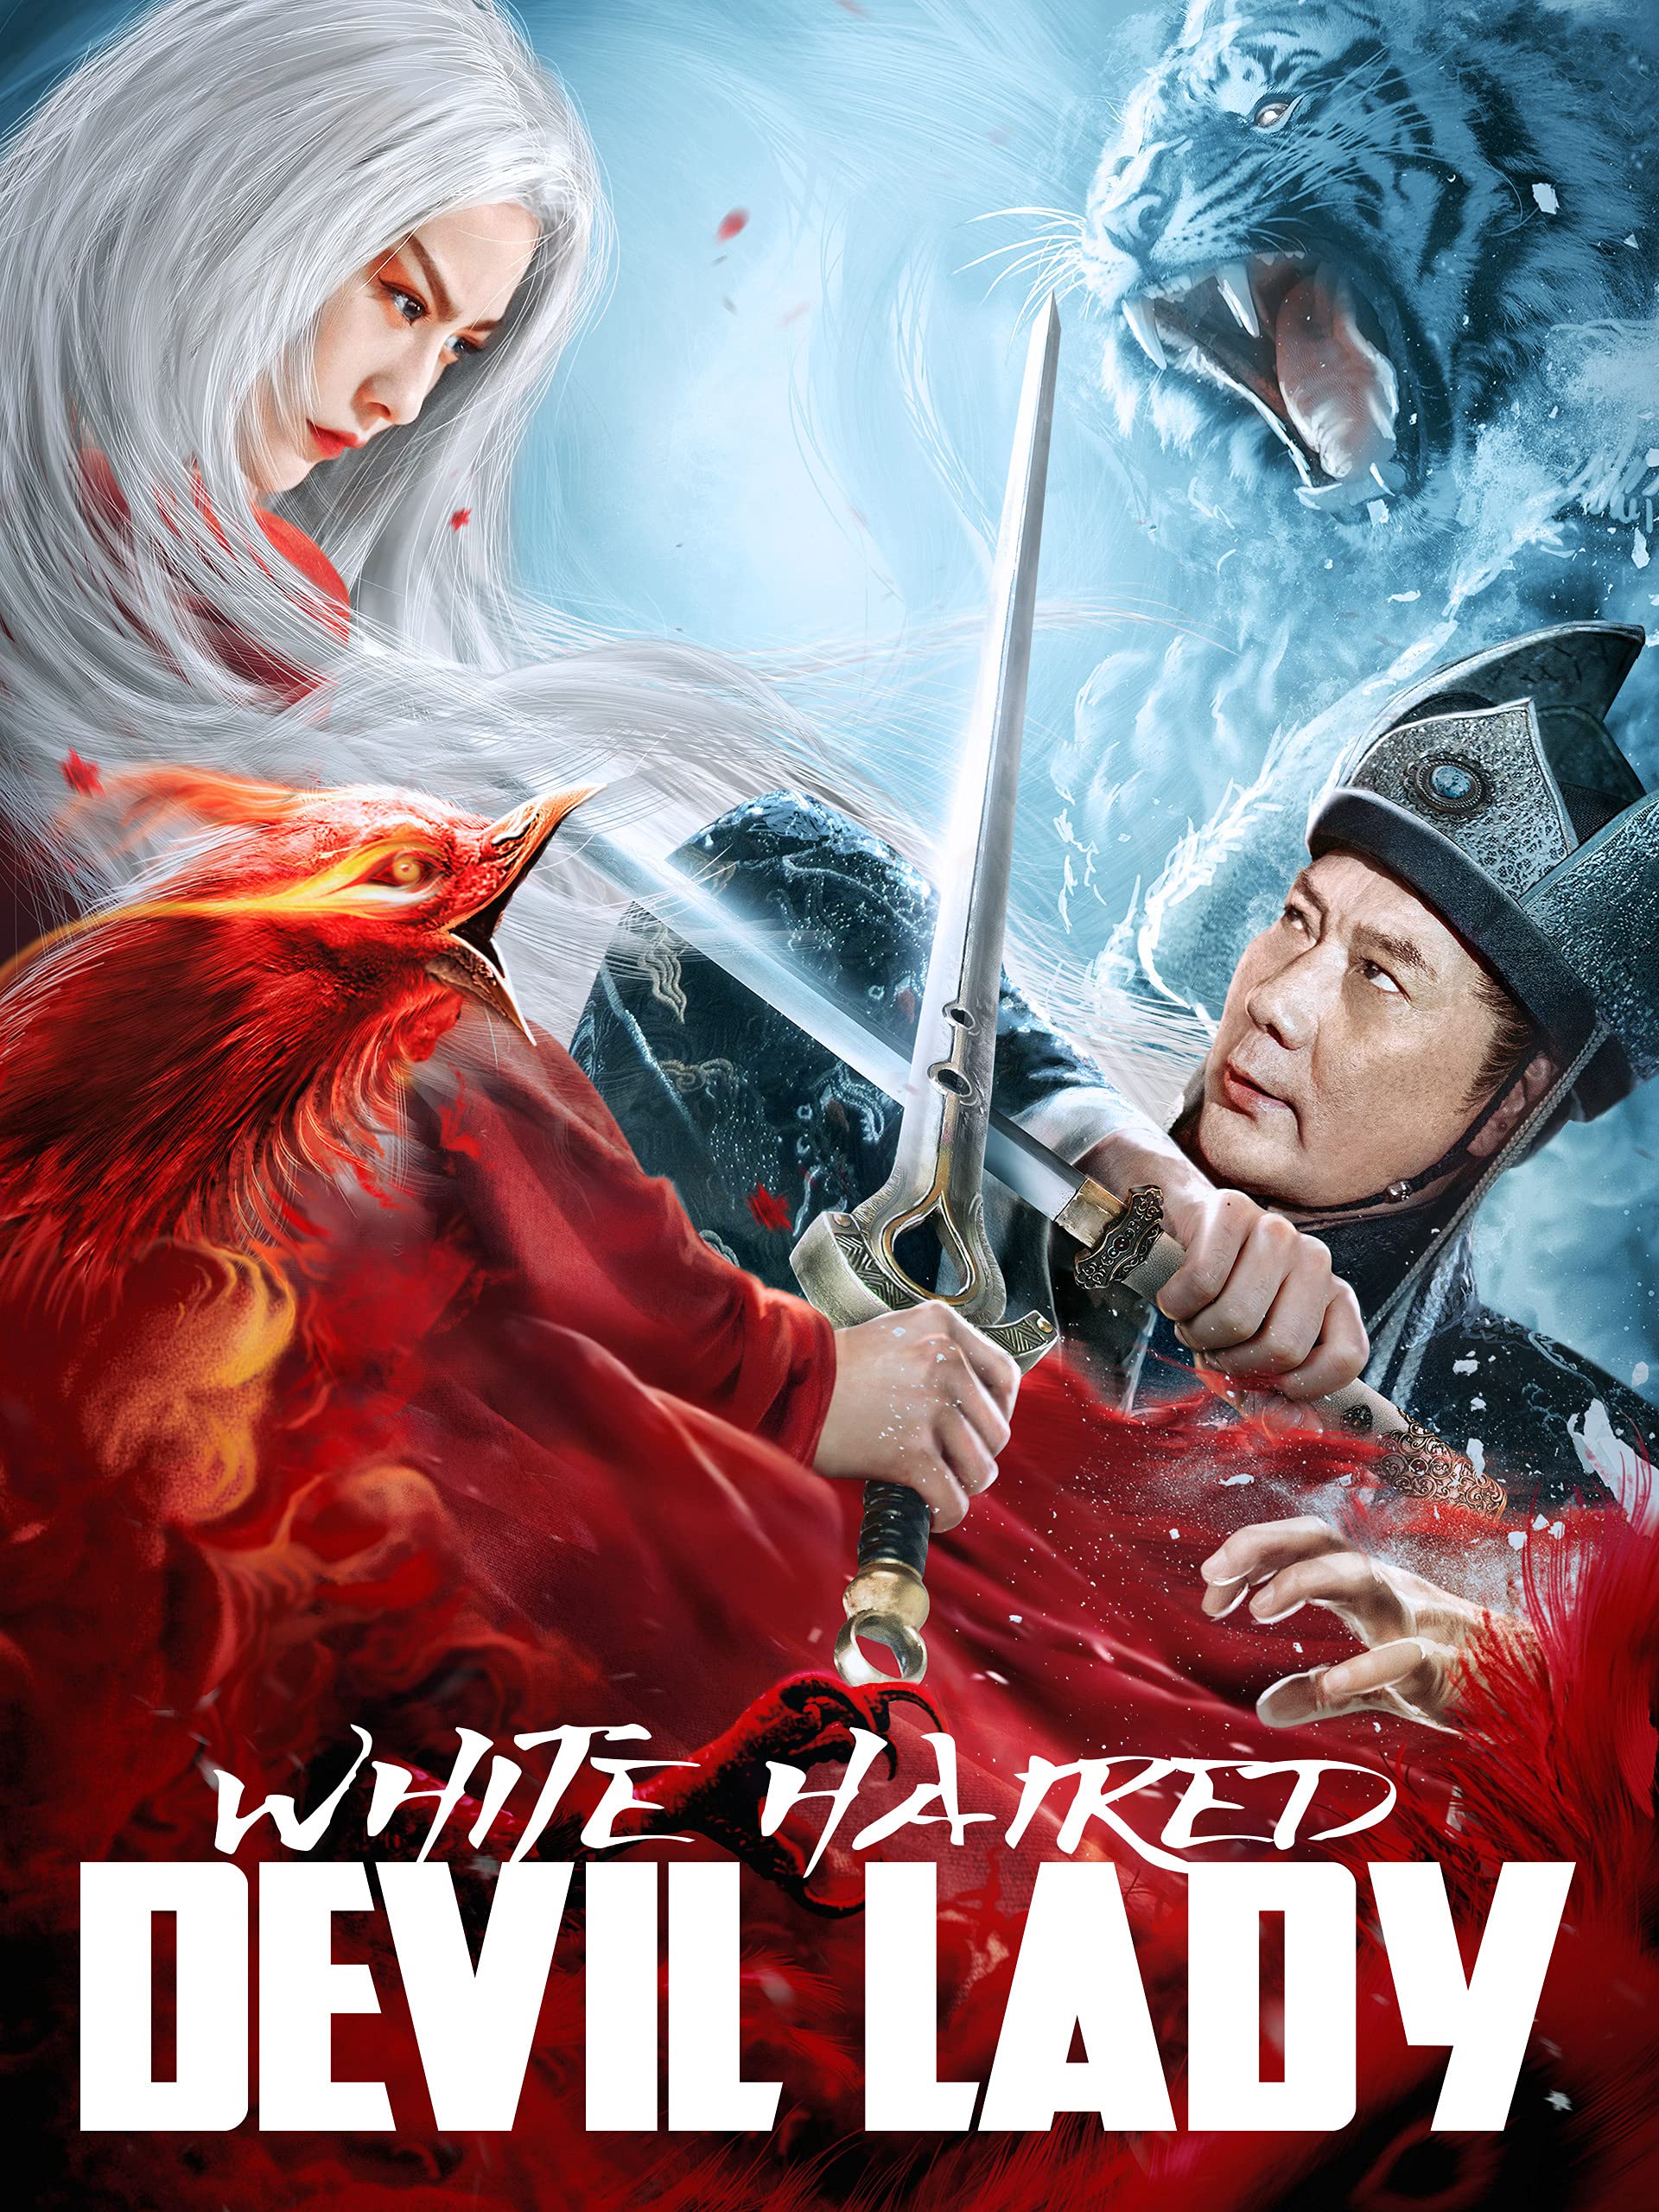 White Haired Devil Lady 2020 Hindi ORG Dual Audio 720p HDRip 956MB Download